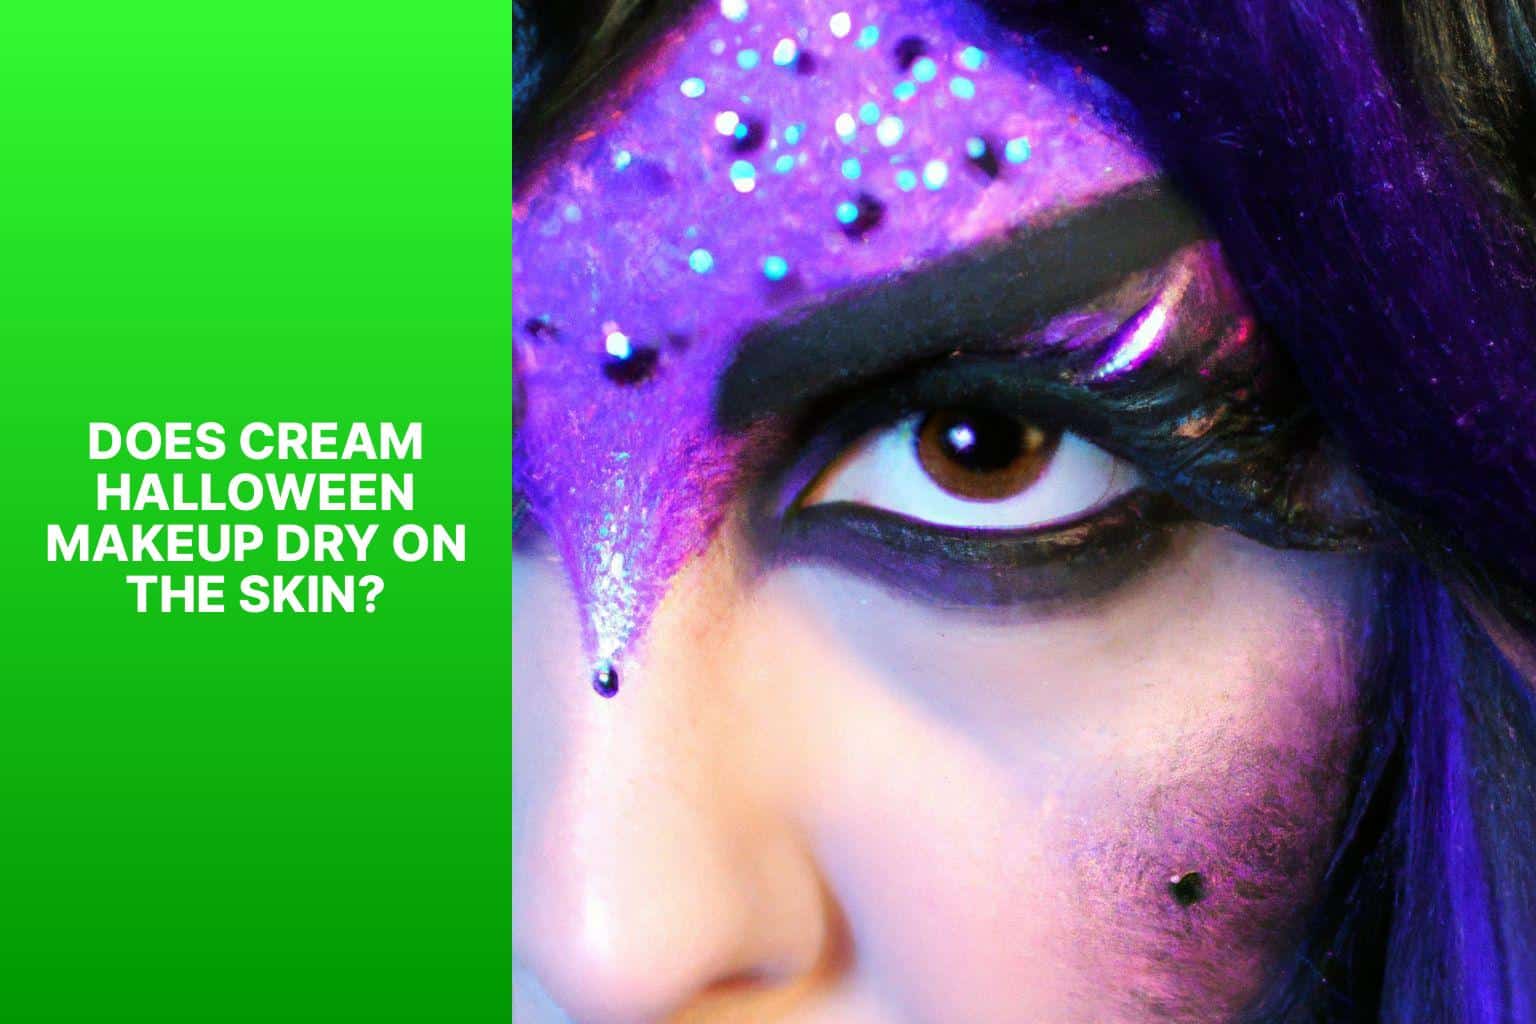 Does Cream Halloween Makeup Dry on the Skin? - does cream halloween makeup dry 